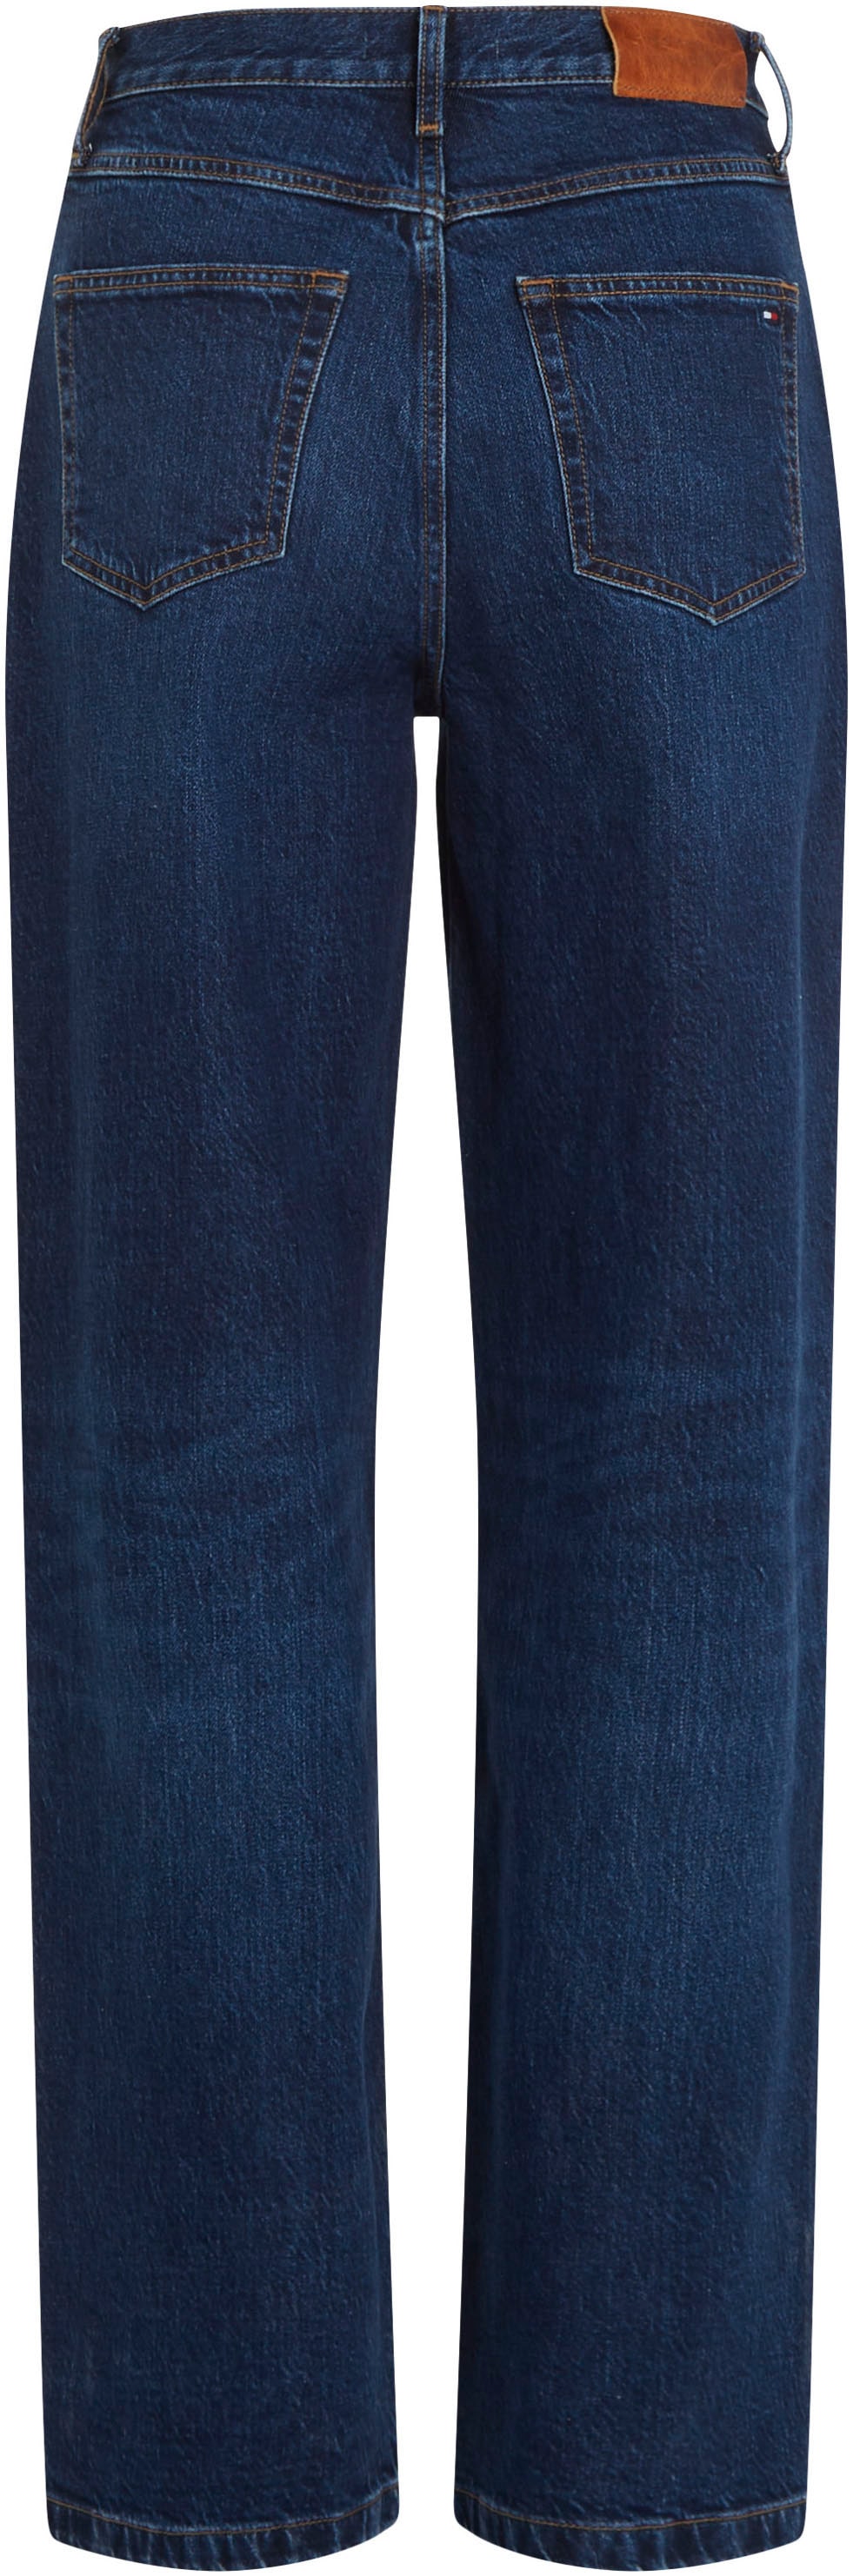 STRAIGHT in PAM«, Hilfiger online HW Tommy weißer Waschung »RELAXED Relax-fit-Jeans kaufen